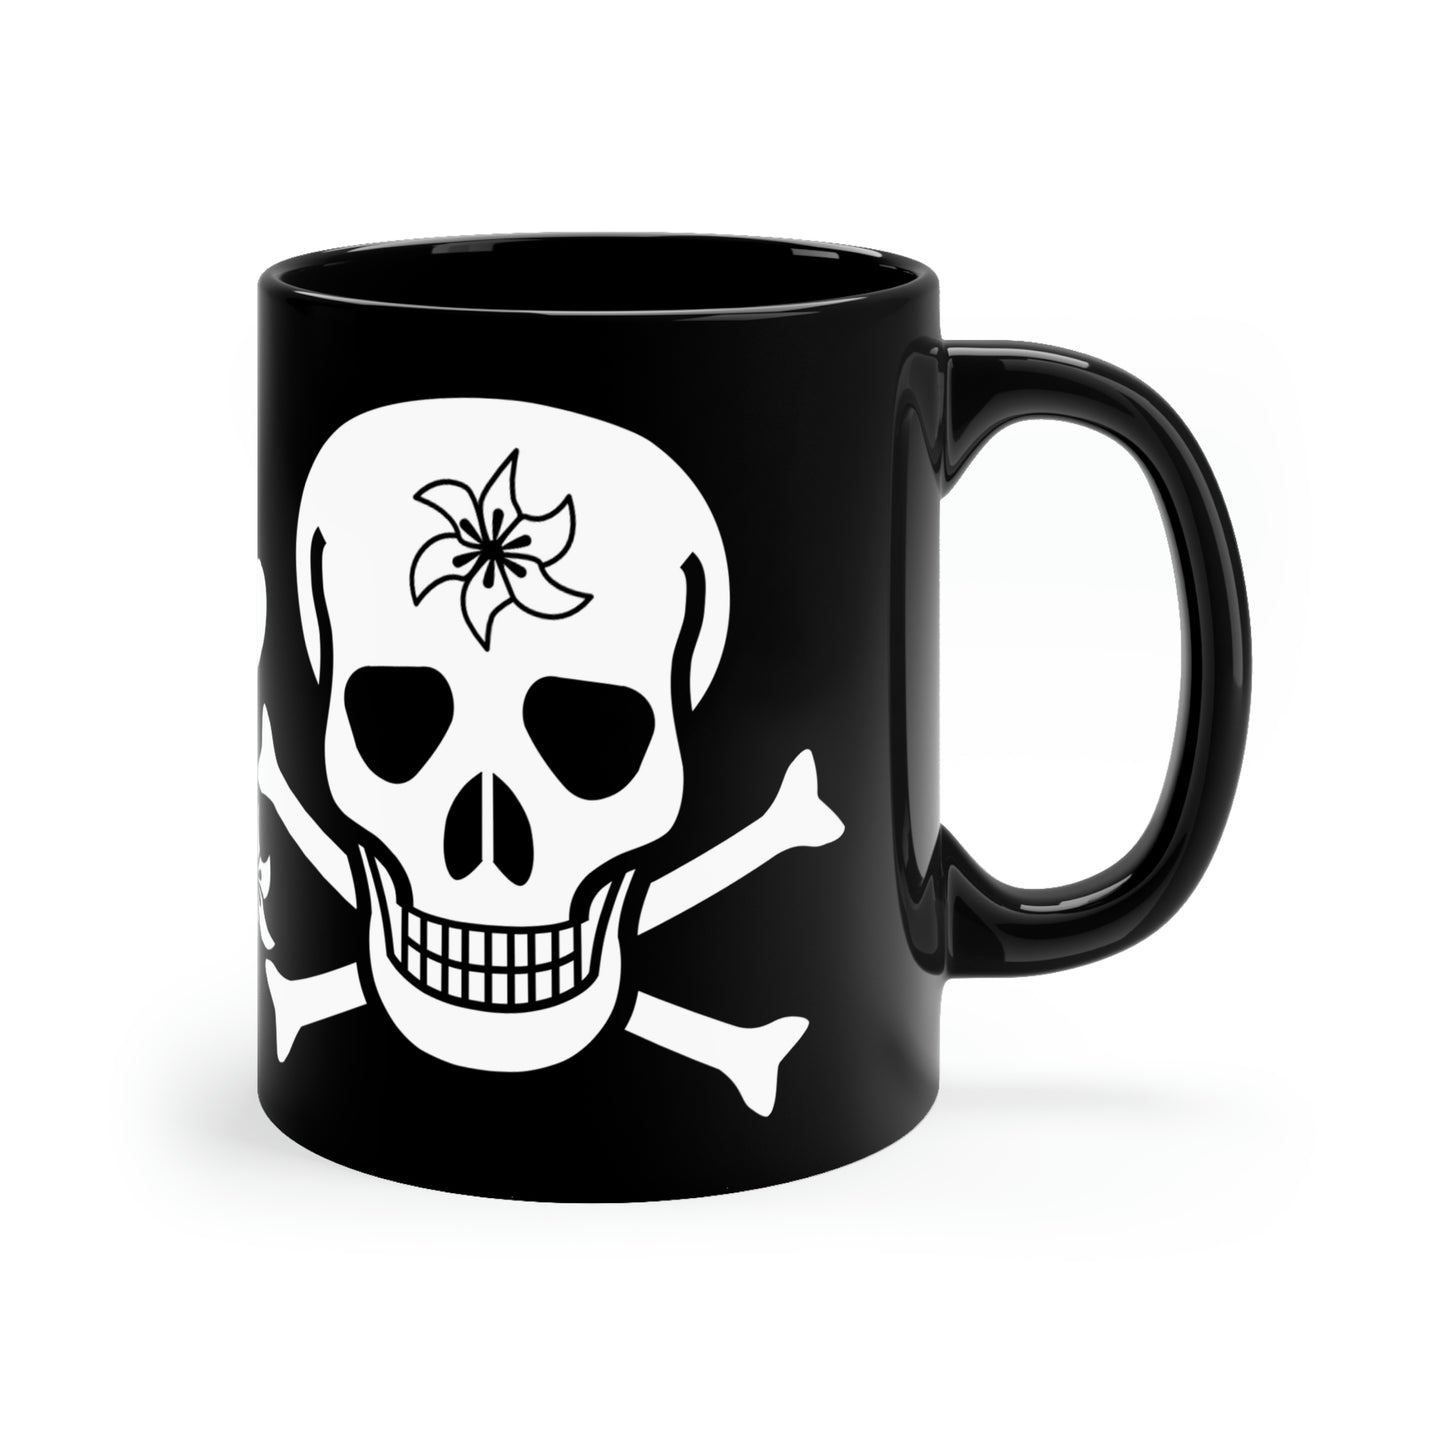 Back view of the Mug of Death's Mistress